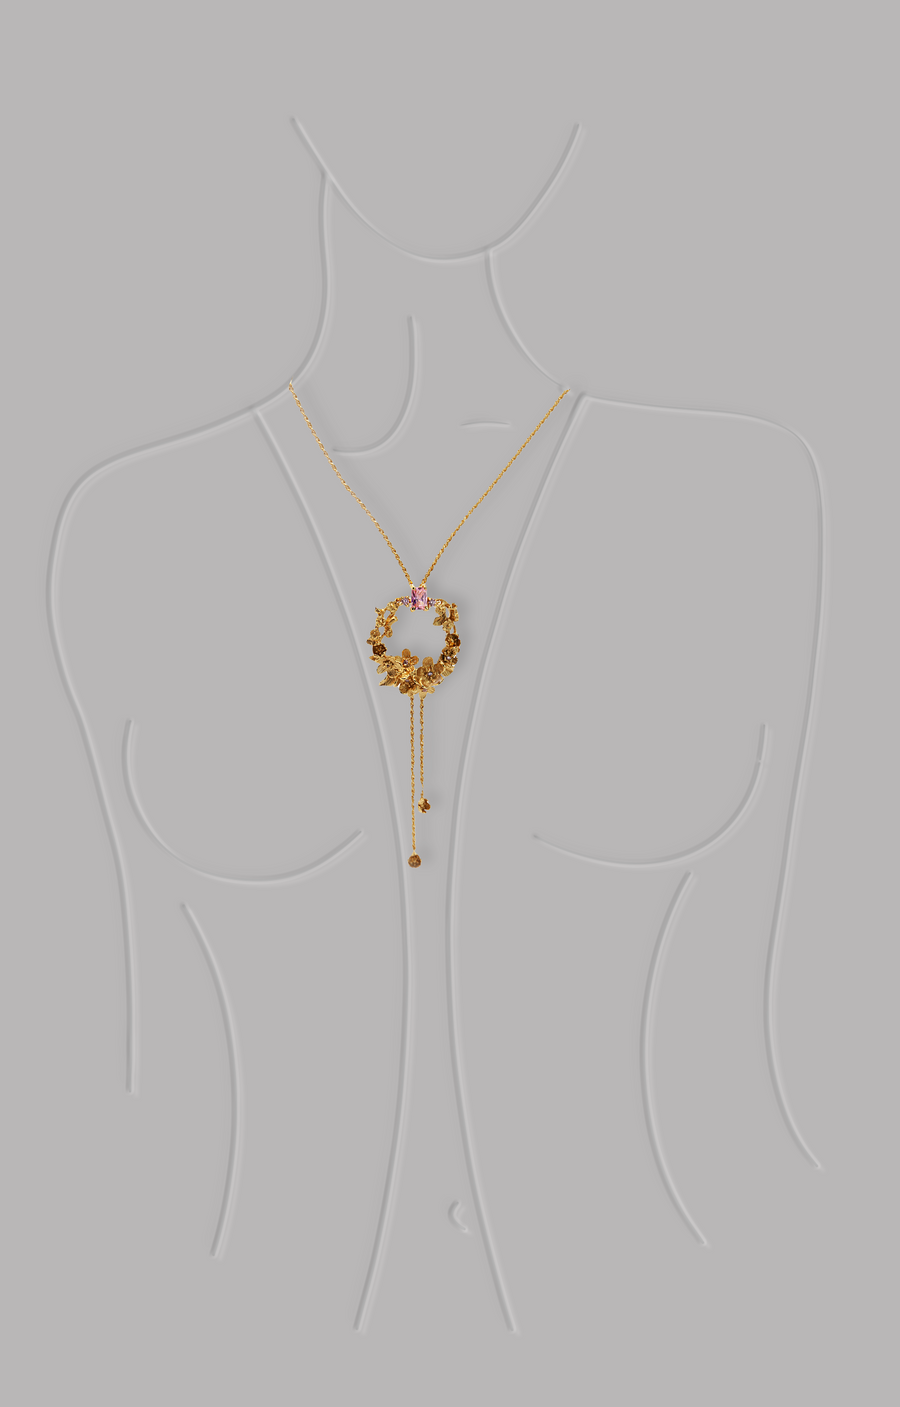 Yellow Gold Pendant Necklace made in Portugal